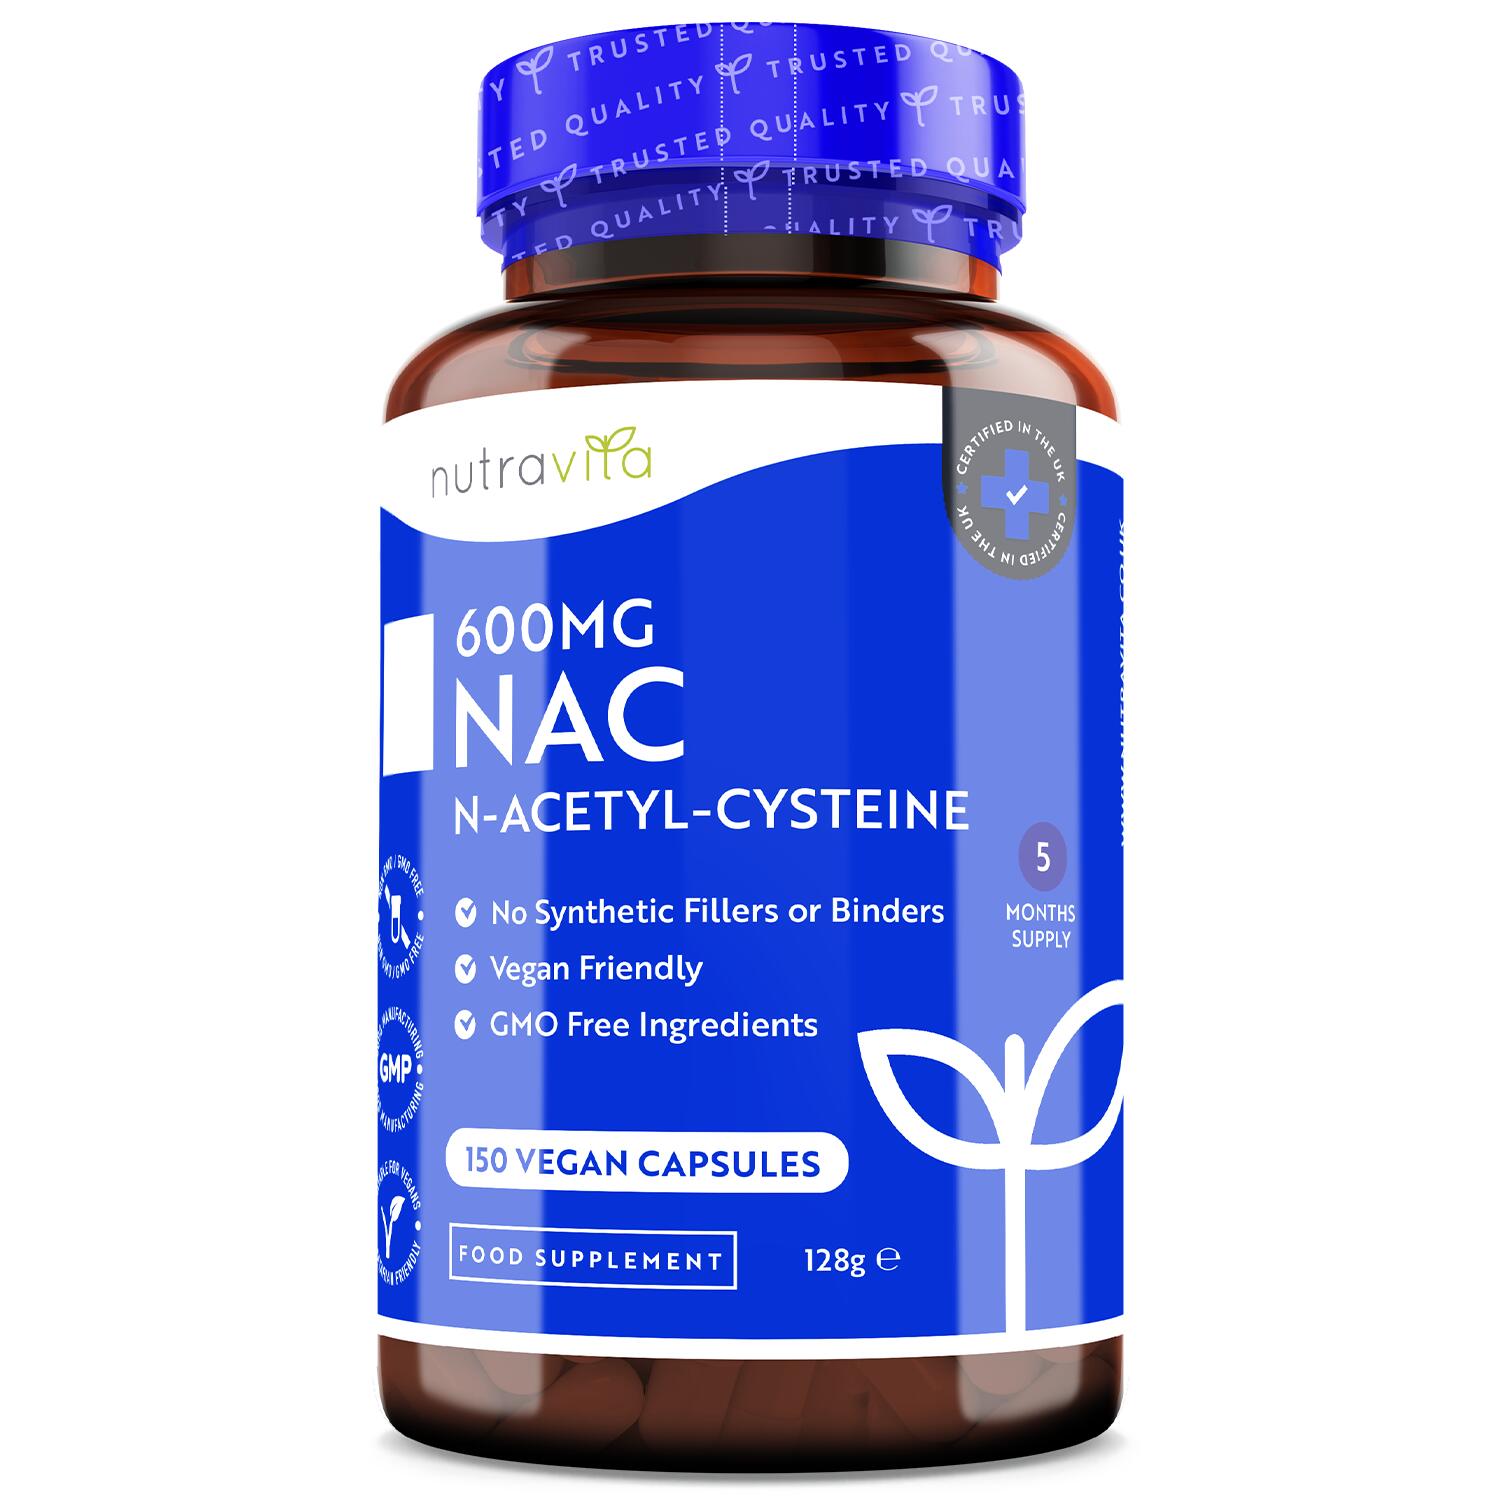 NAC is a stable form of amino acid, L-Cysteine which is in high-protein foods 1/6